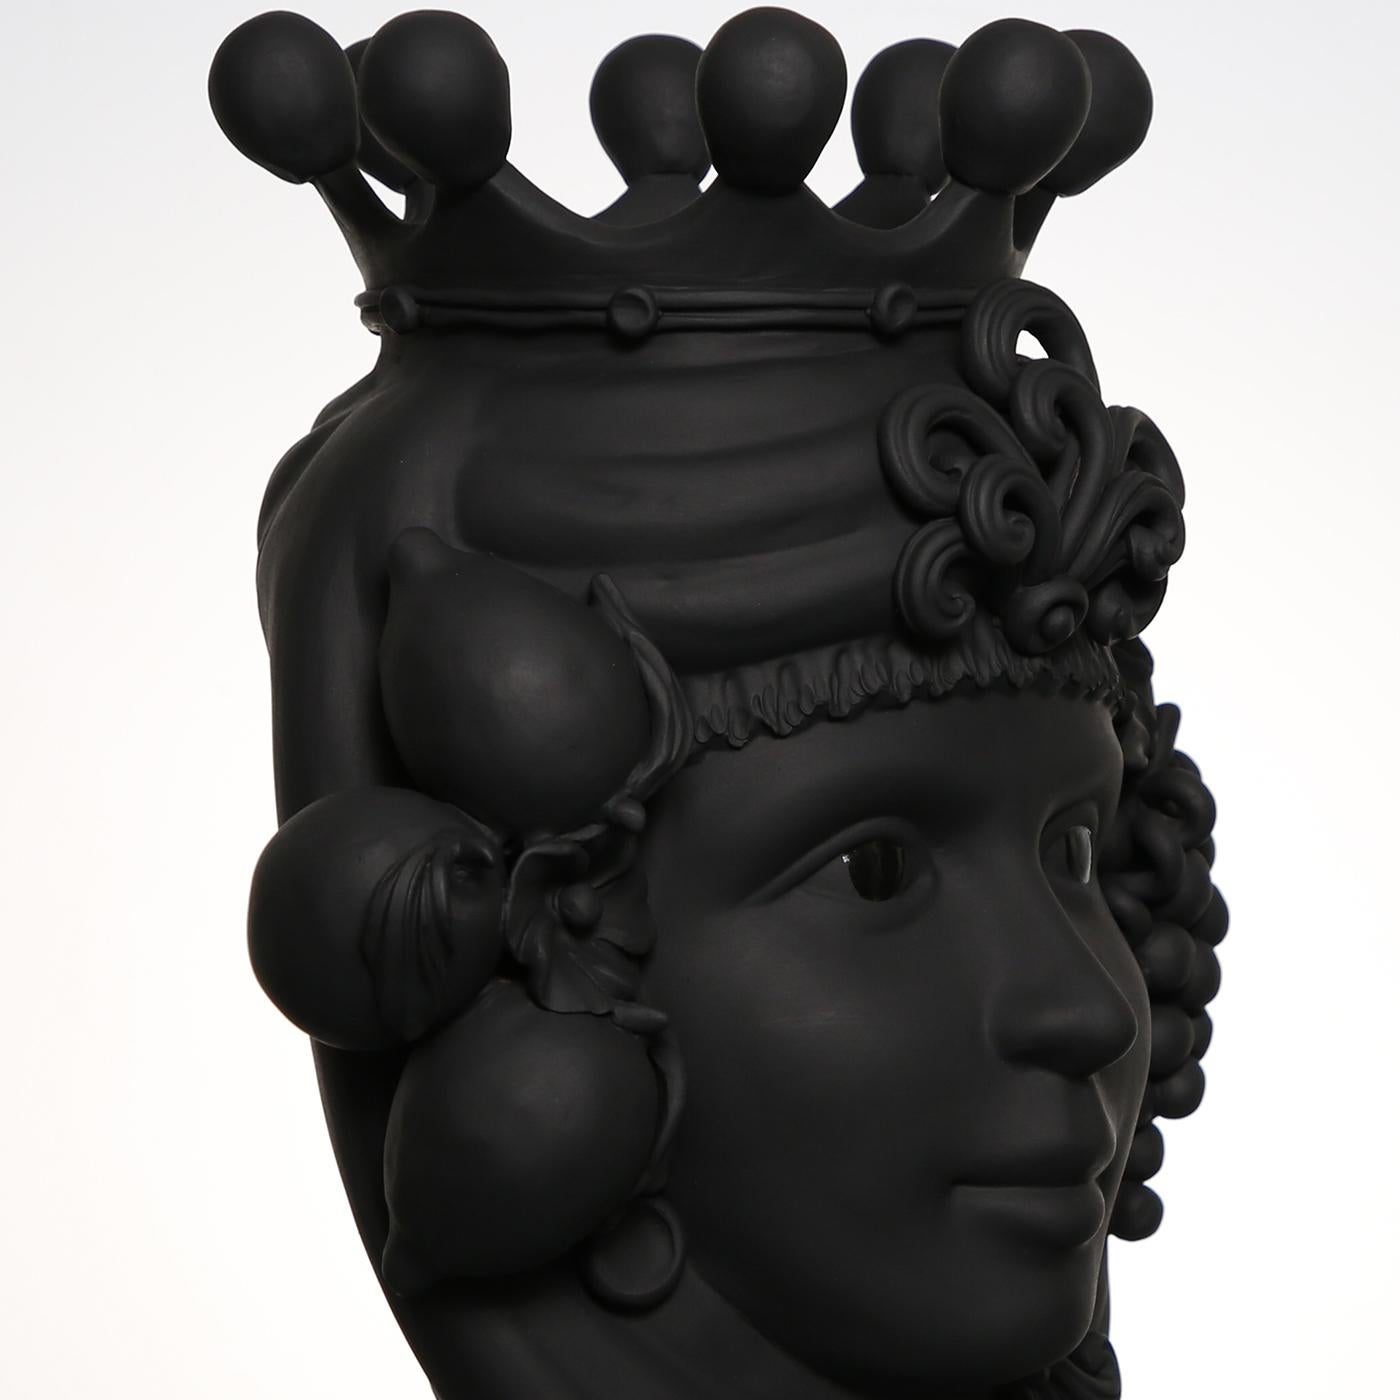 This anthropomorphic vase is made entirely by hand and painted in a black matte monochrome tint, rich in natural pigments and resin binders that provide intense color depth. Only the eyes are glazed so they stand out, emphasizing the beauty of the